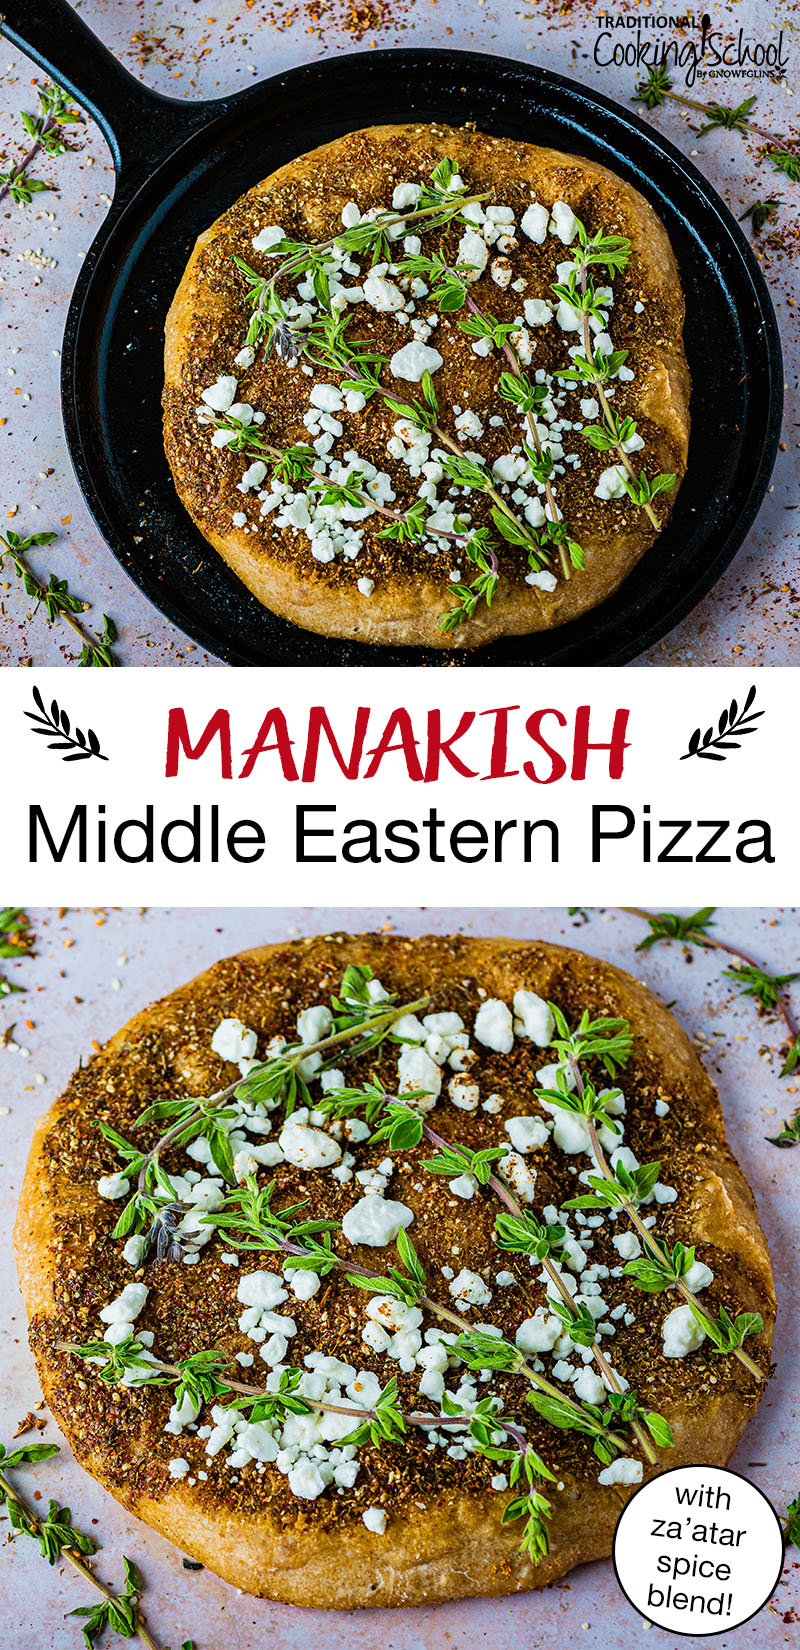 photo collage of manakish (Middle Eastern pizza) topped with labneh cheese, za'atar seasoning and herbs. Text overlay says, "Manakish - Middle Eastern Pizza with Za'atar spice blend!"